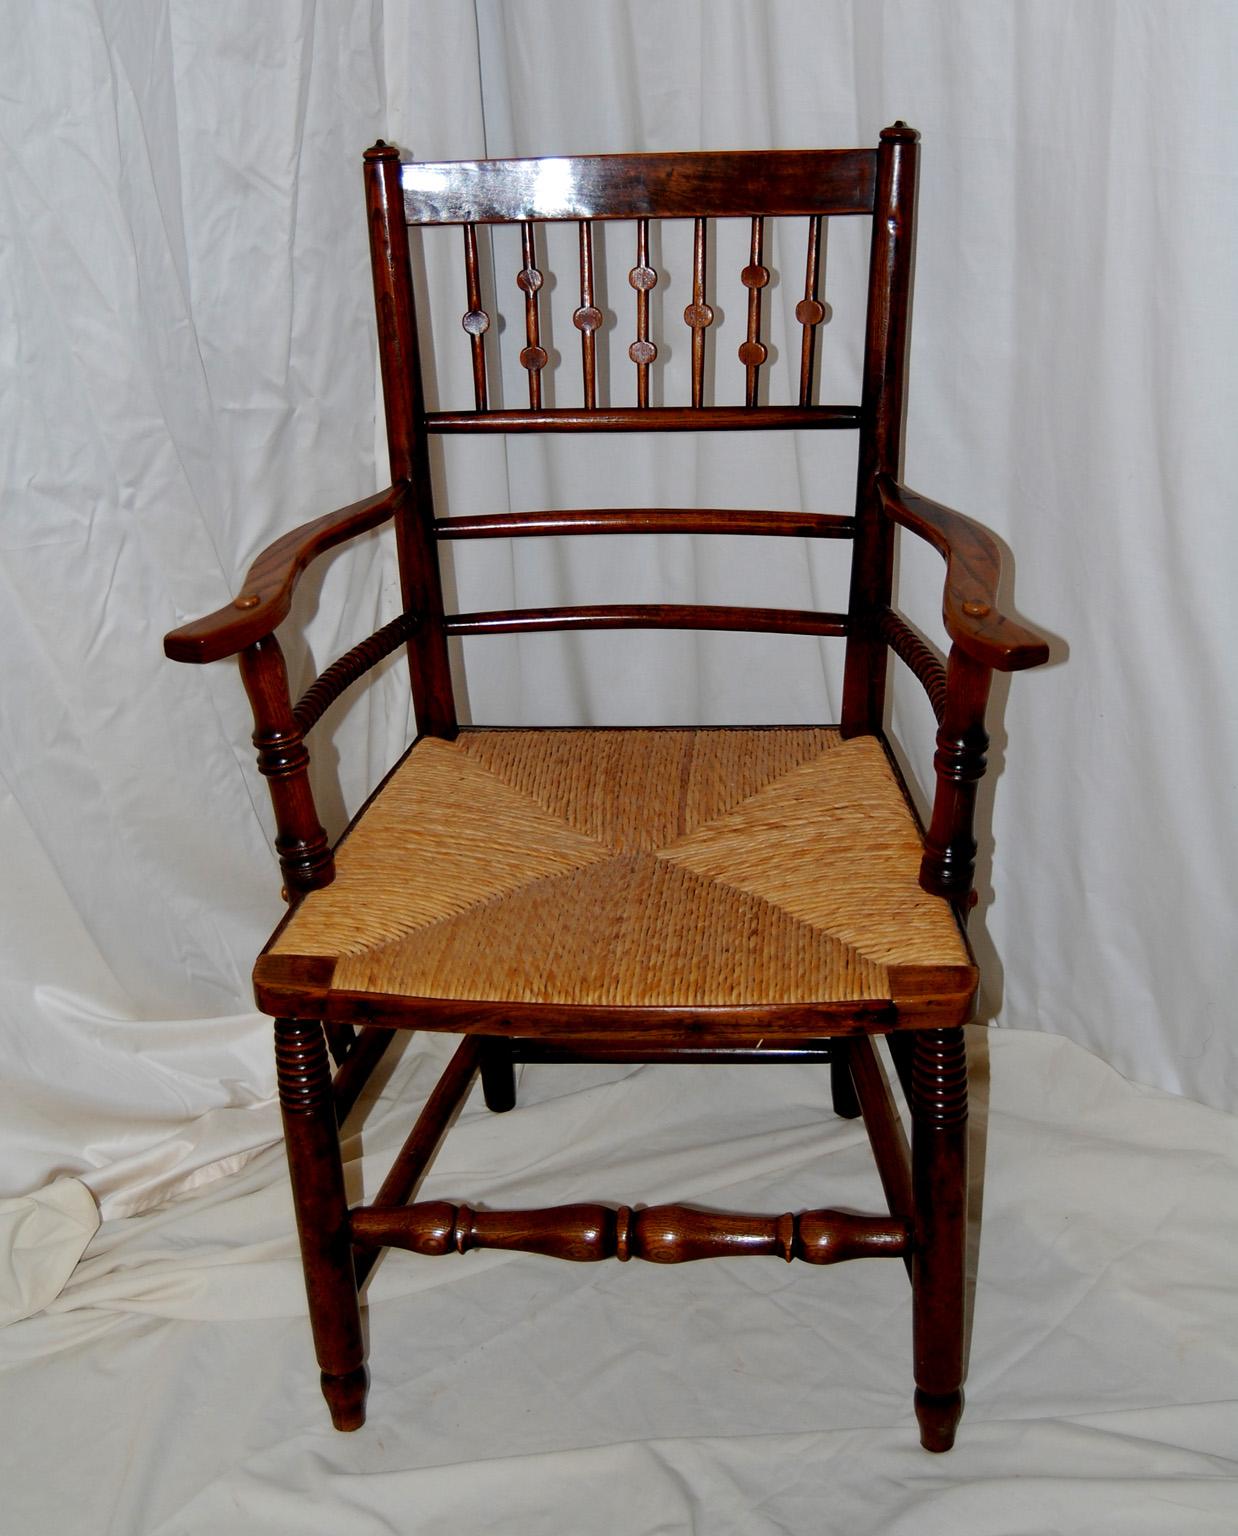  English Arts and Crafts period elm rush seated spindle back armchair.  This armchair has unusual flattened turnings to the back and bobbin turnings on the member under the arm.  The double box stretchers connecting the legs make for a sturdy yet